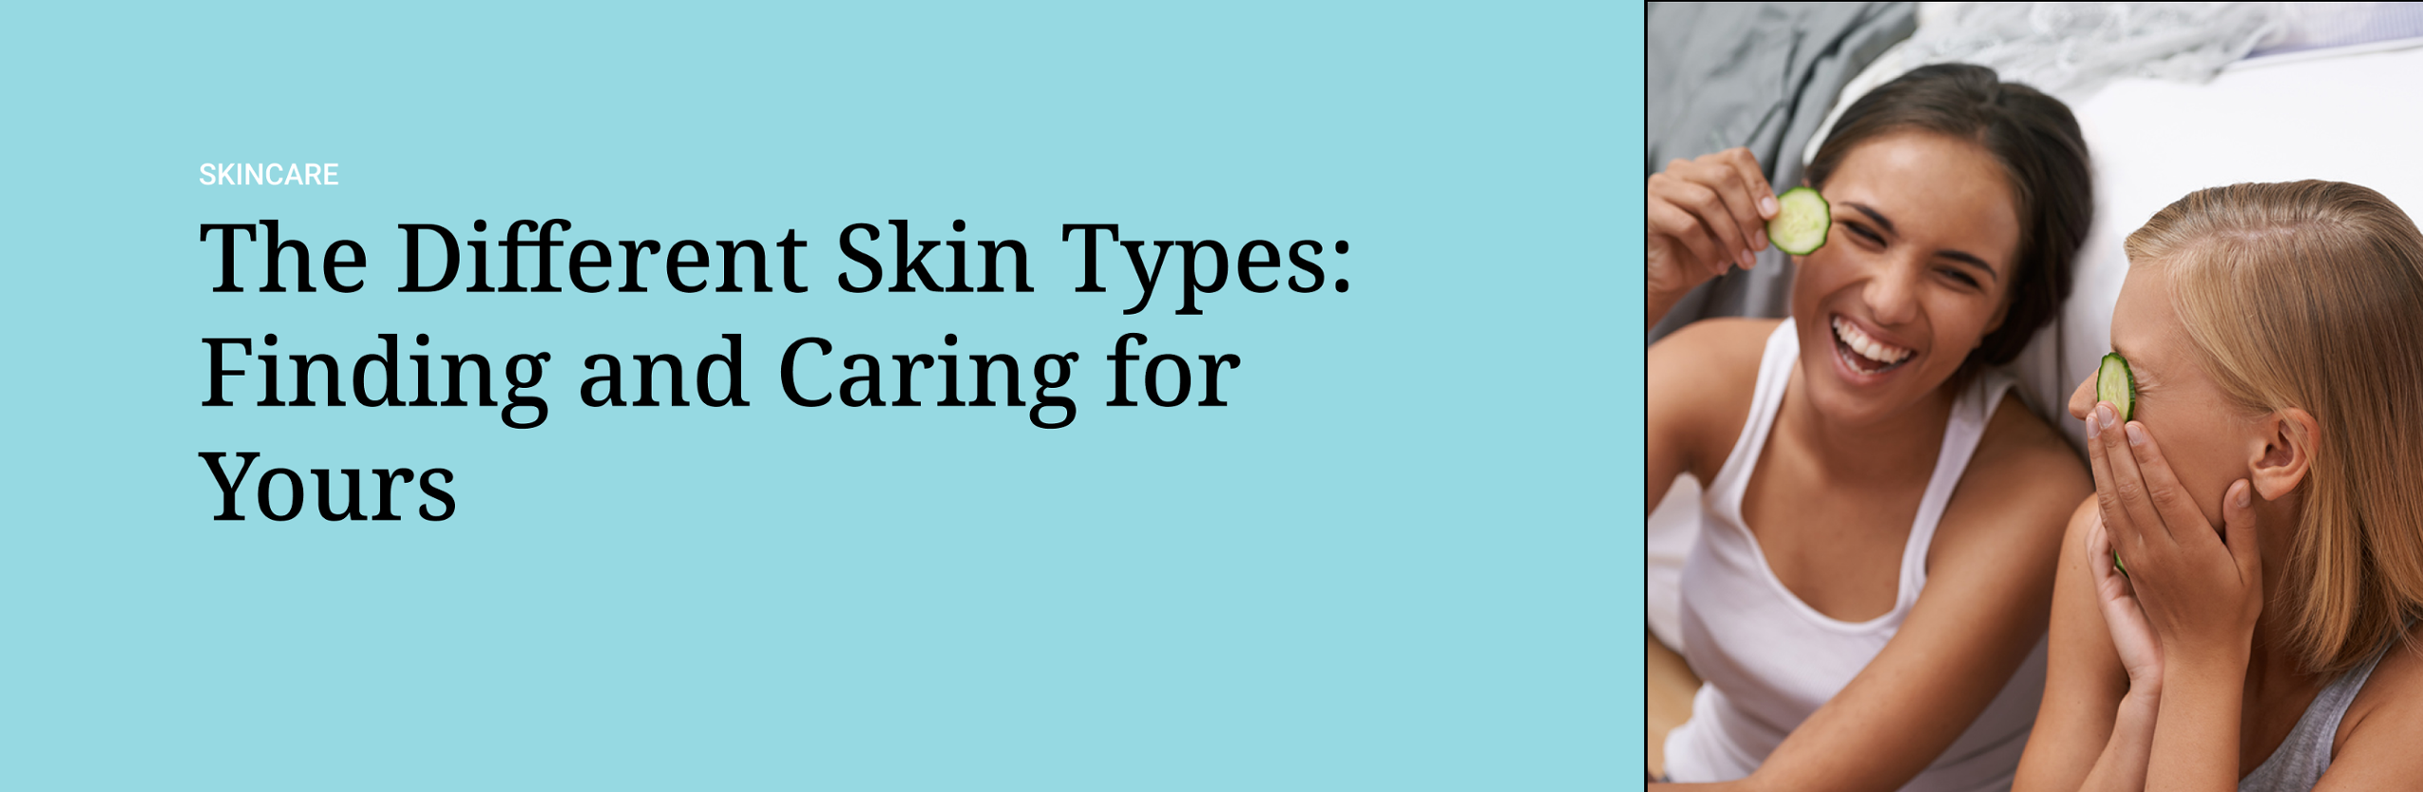 The Different Skin Types